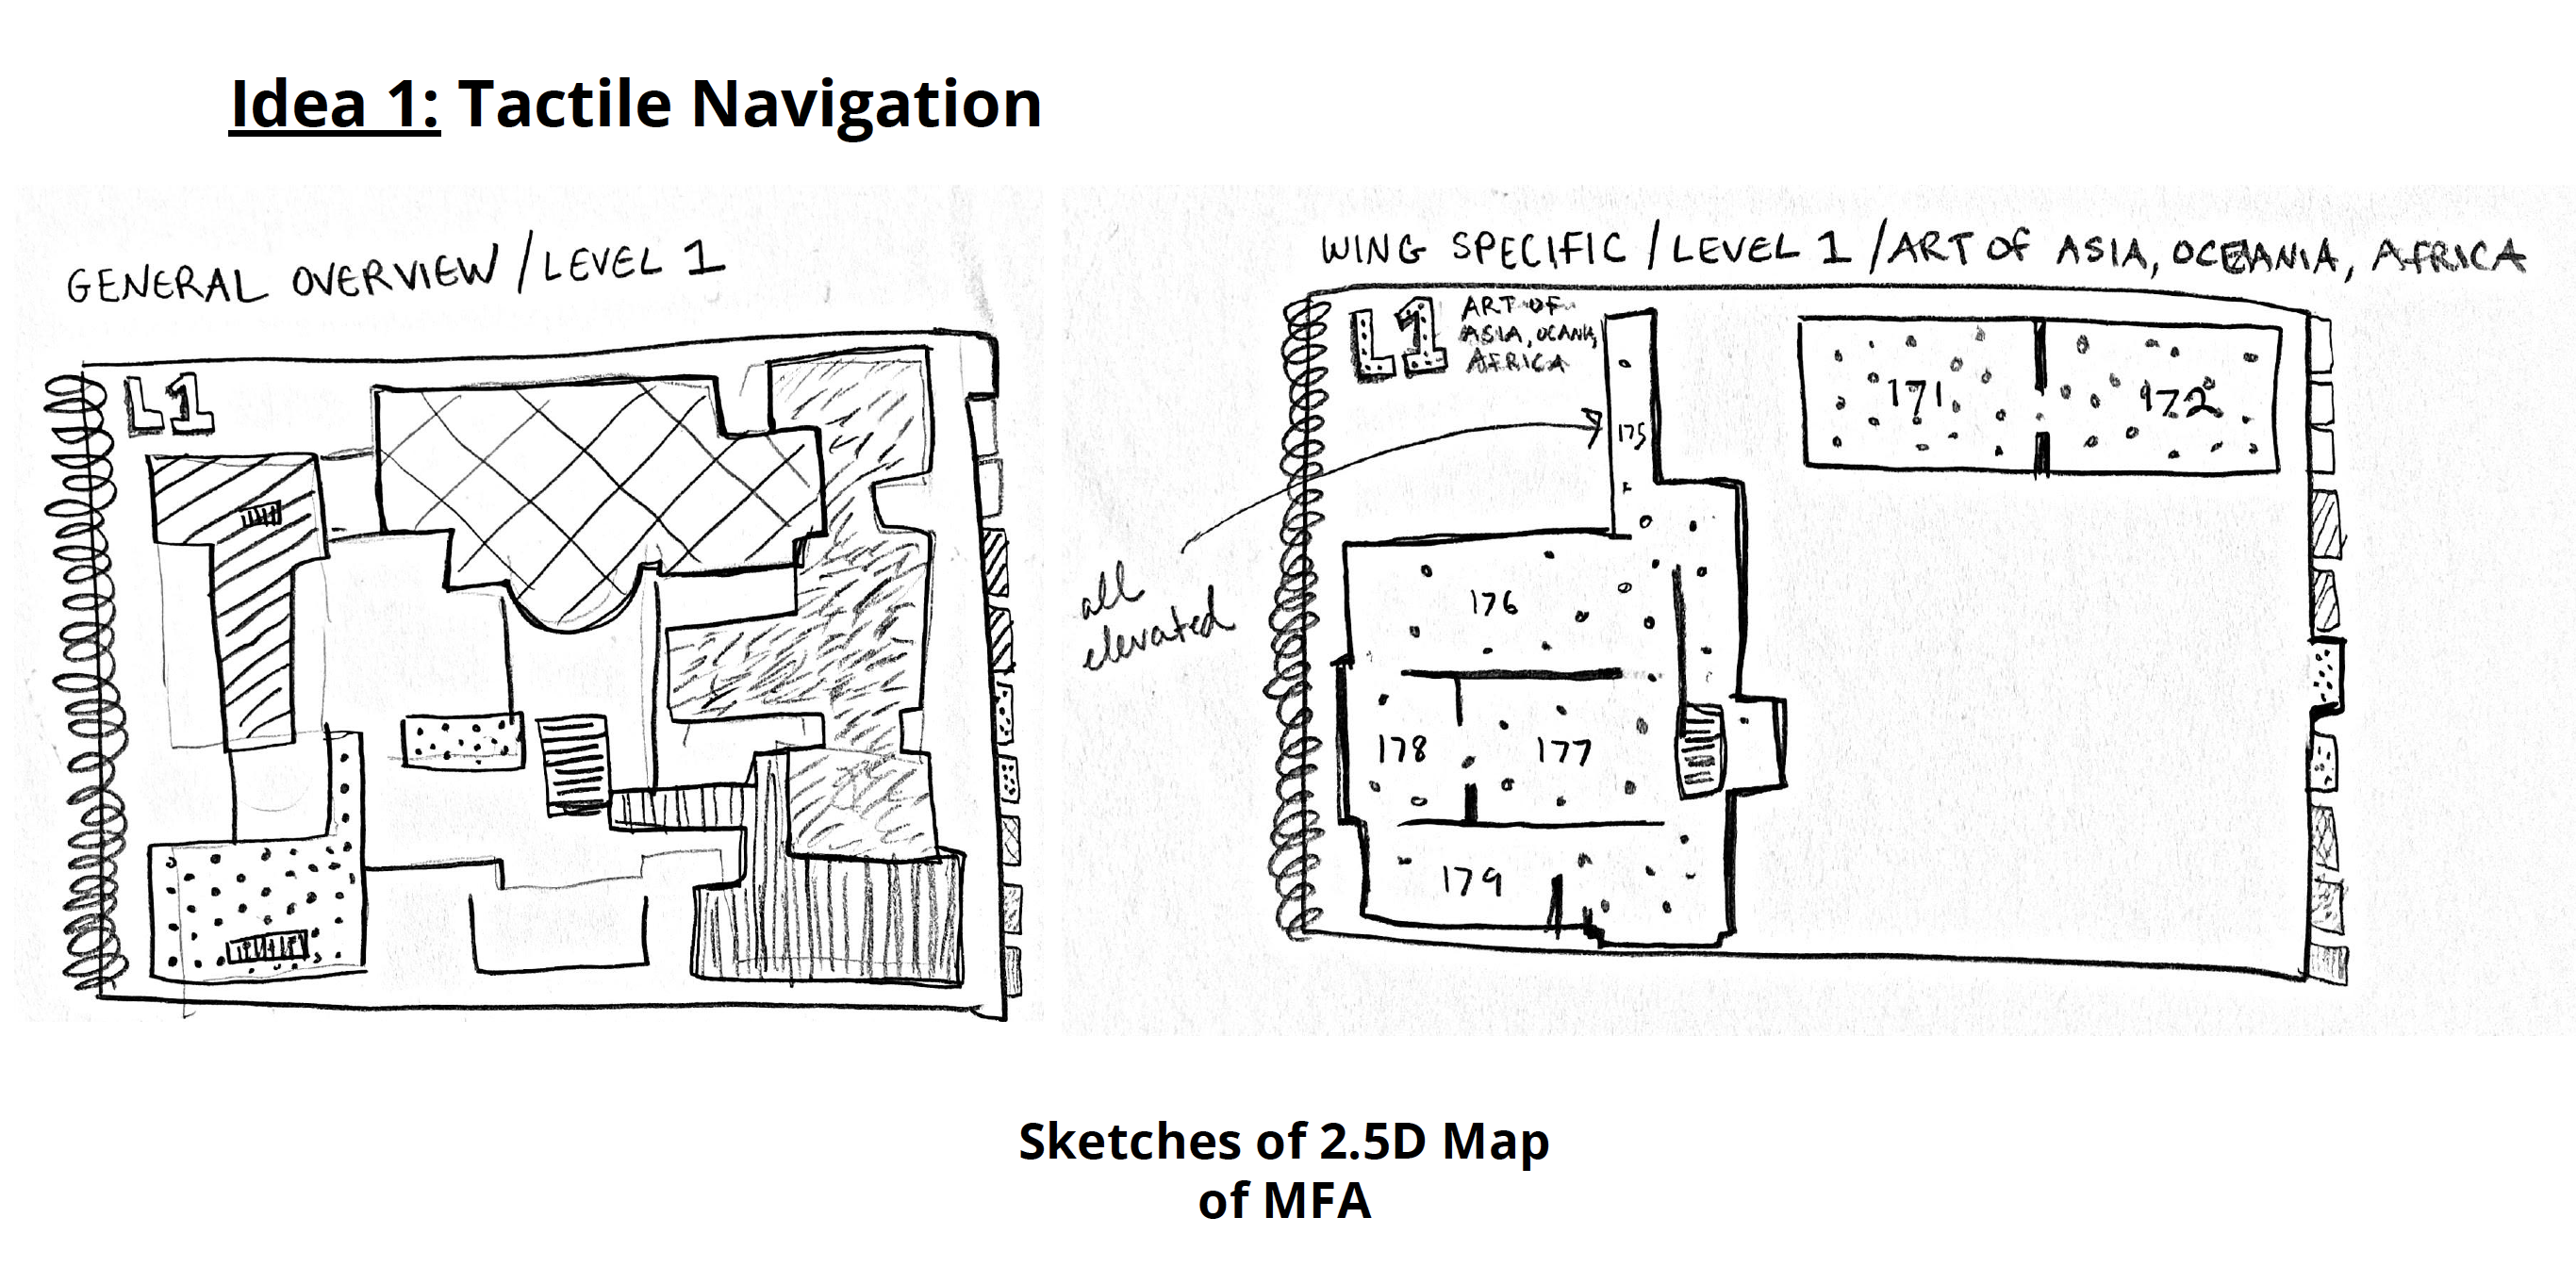 Concept sketch of various textures to be used on tactile maps of museum